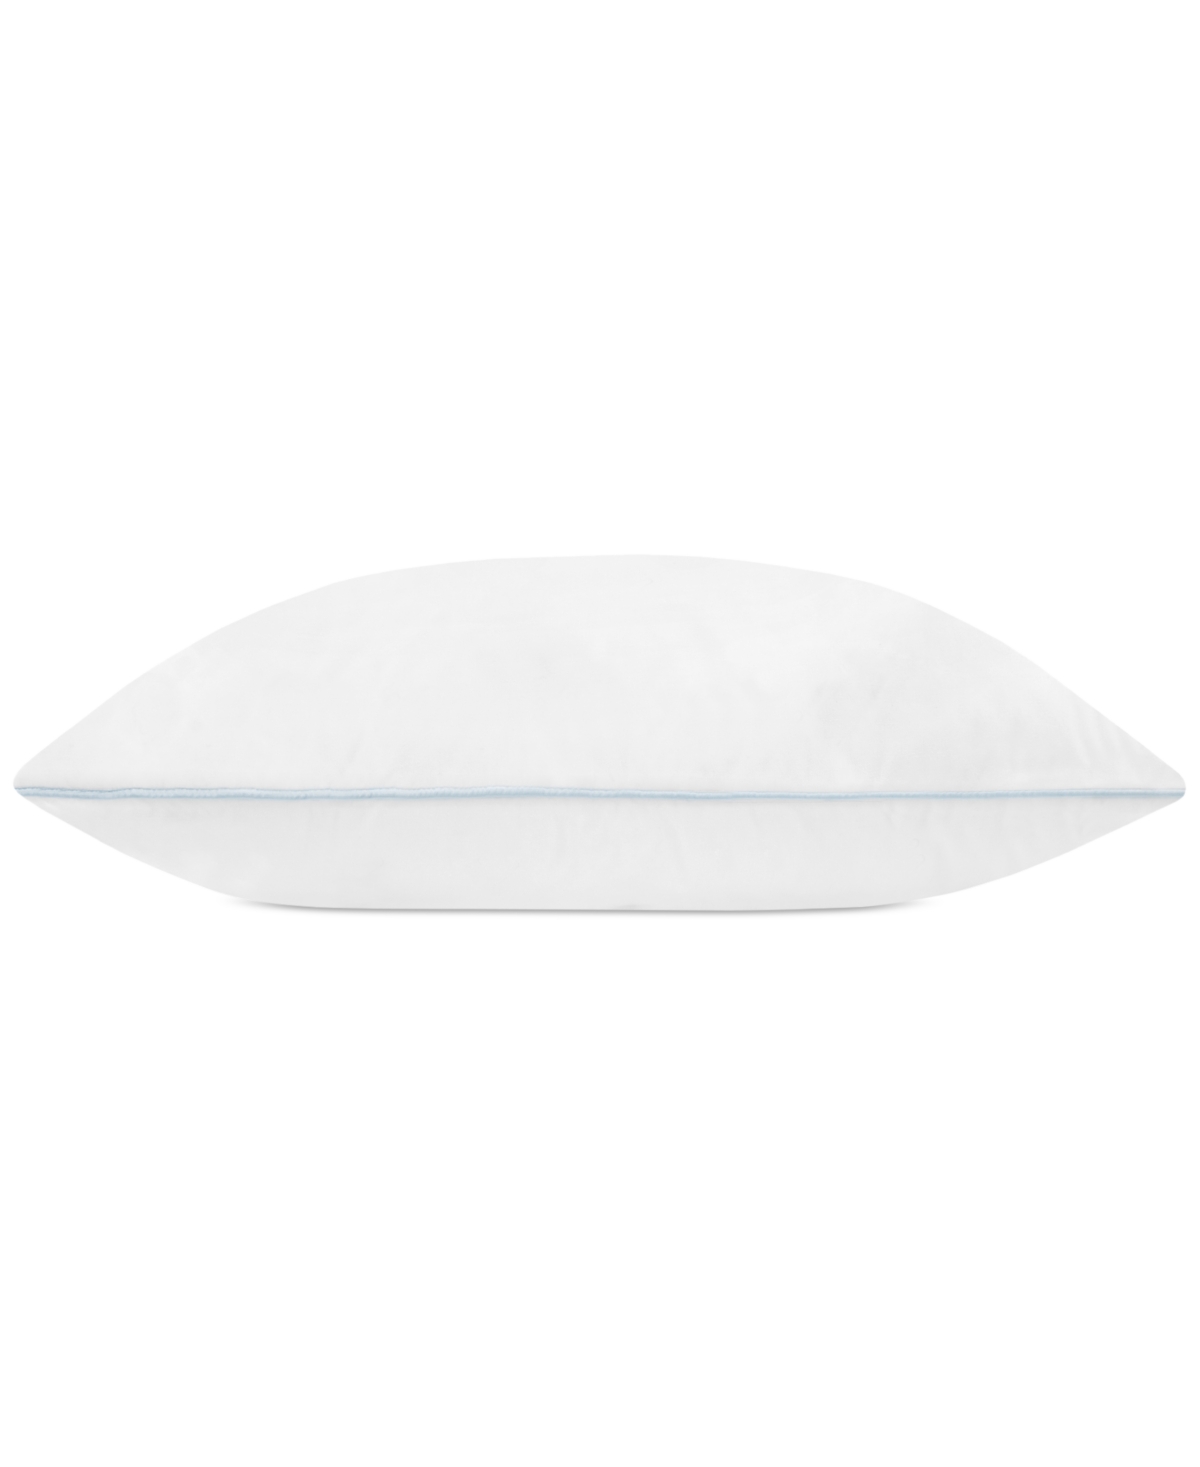 Therapedic Premier Ultra Cooling Down Alternative Pillow, Standard/queen In White